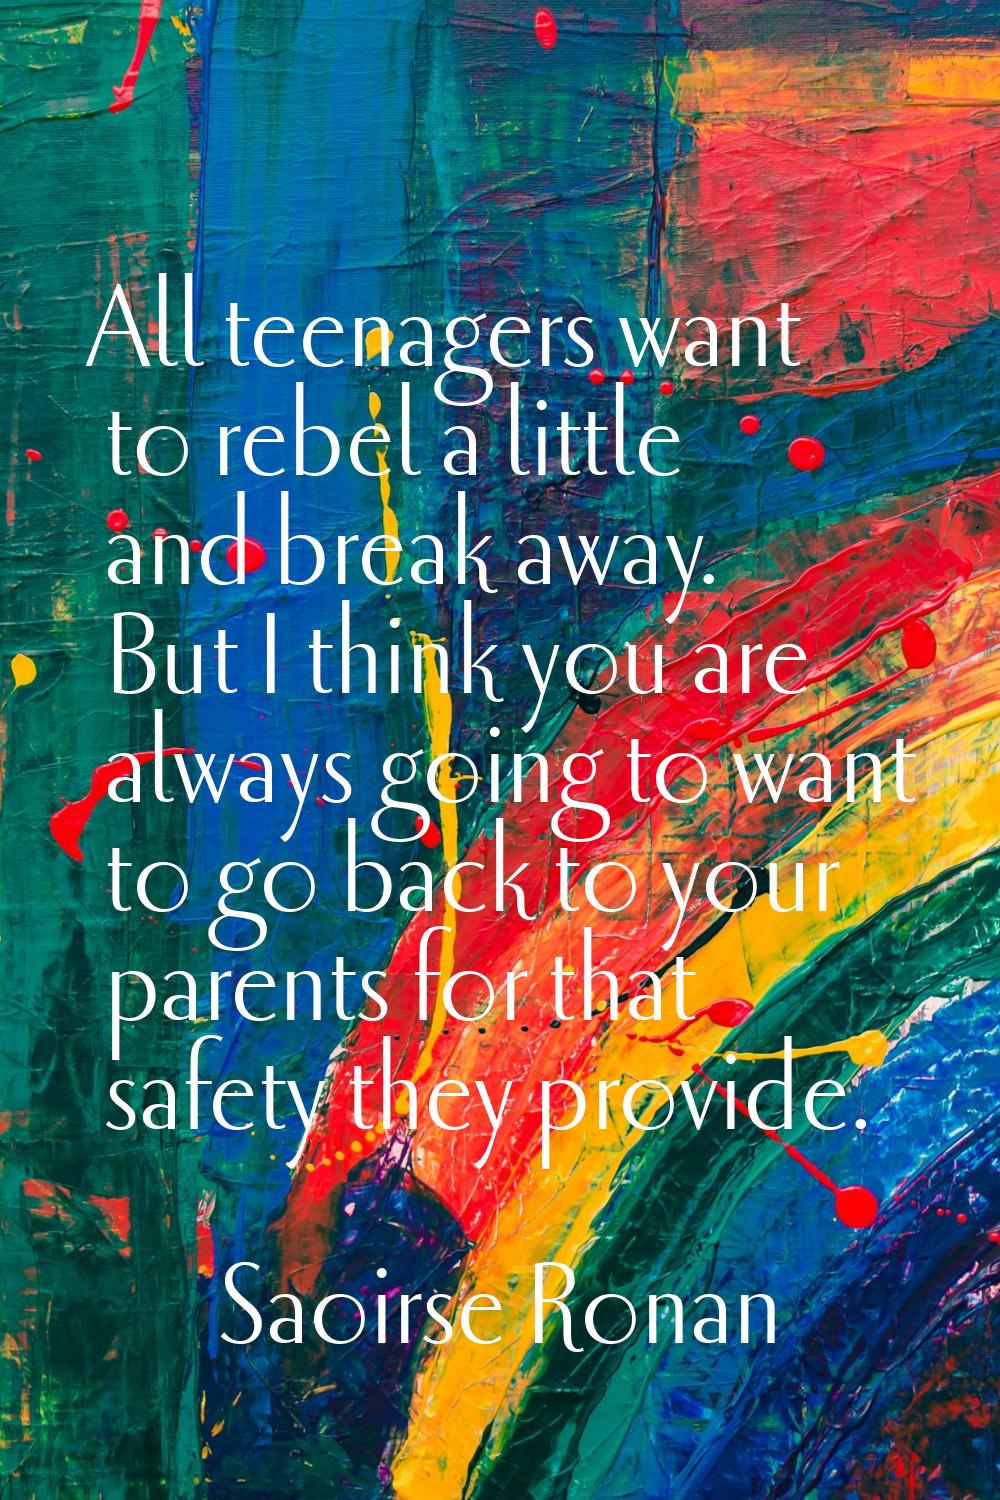 All teenagers want to rebel a little and break away. But I think you are always going to want to go